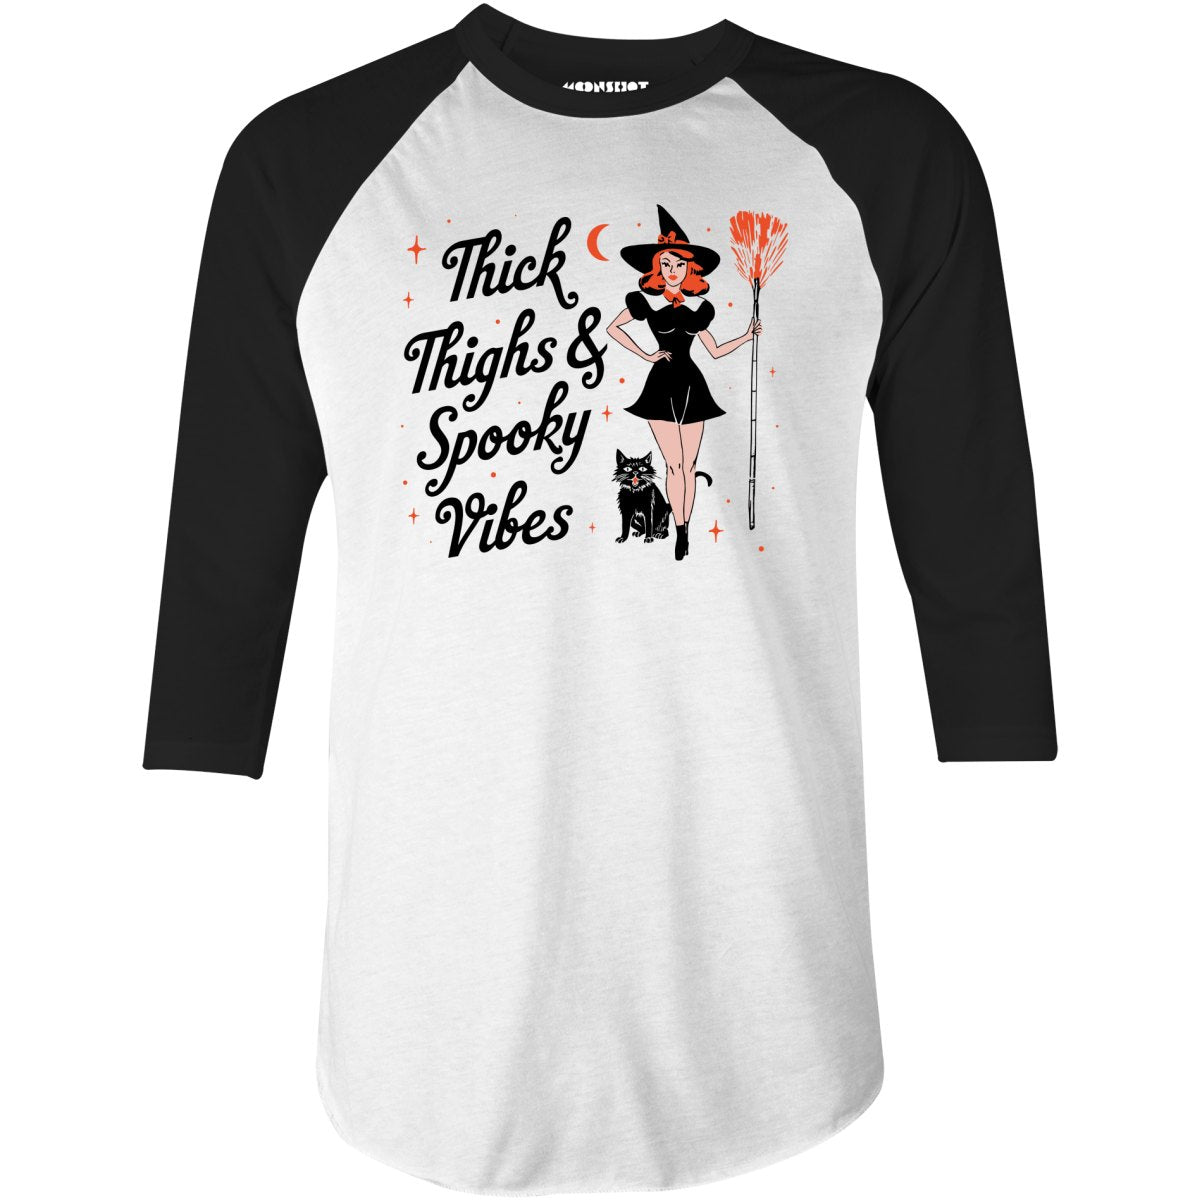 Thick Thighs and Spooky Vibes - 3/4 Sleeve Raglan T-Shirt